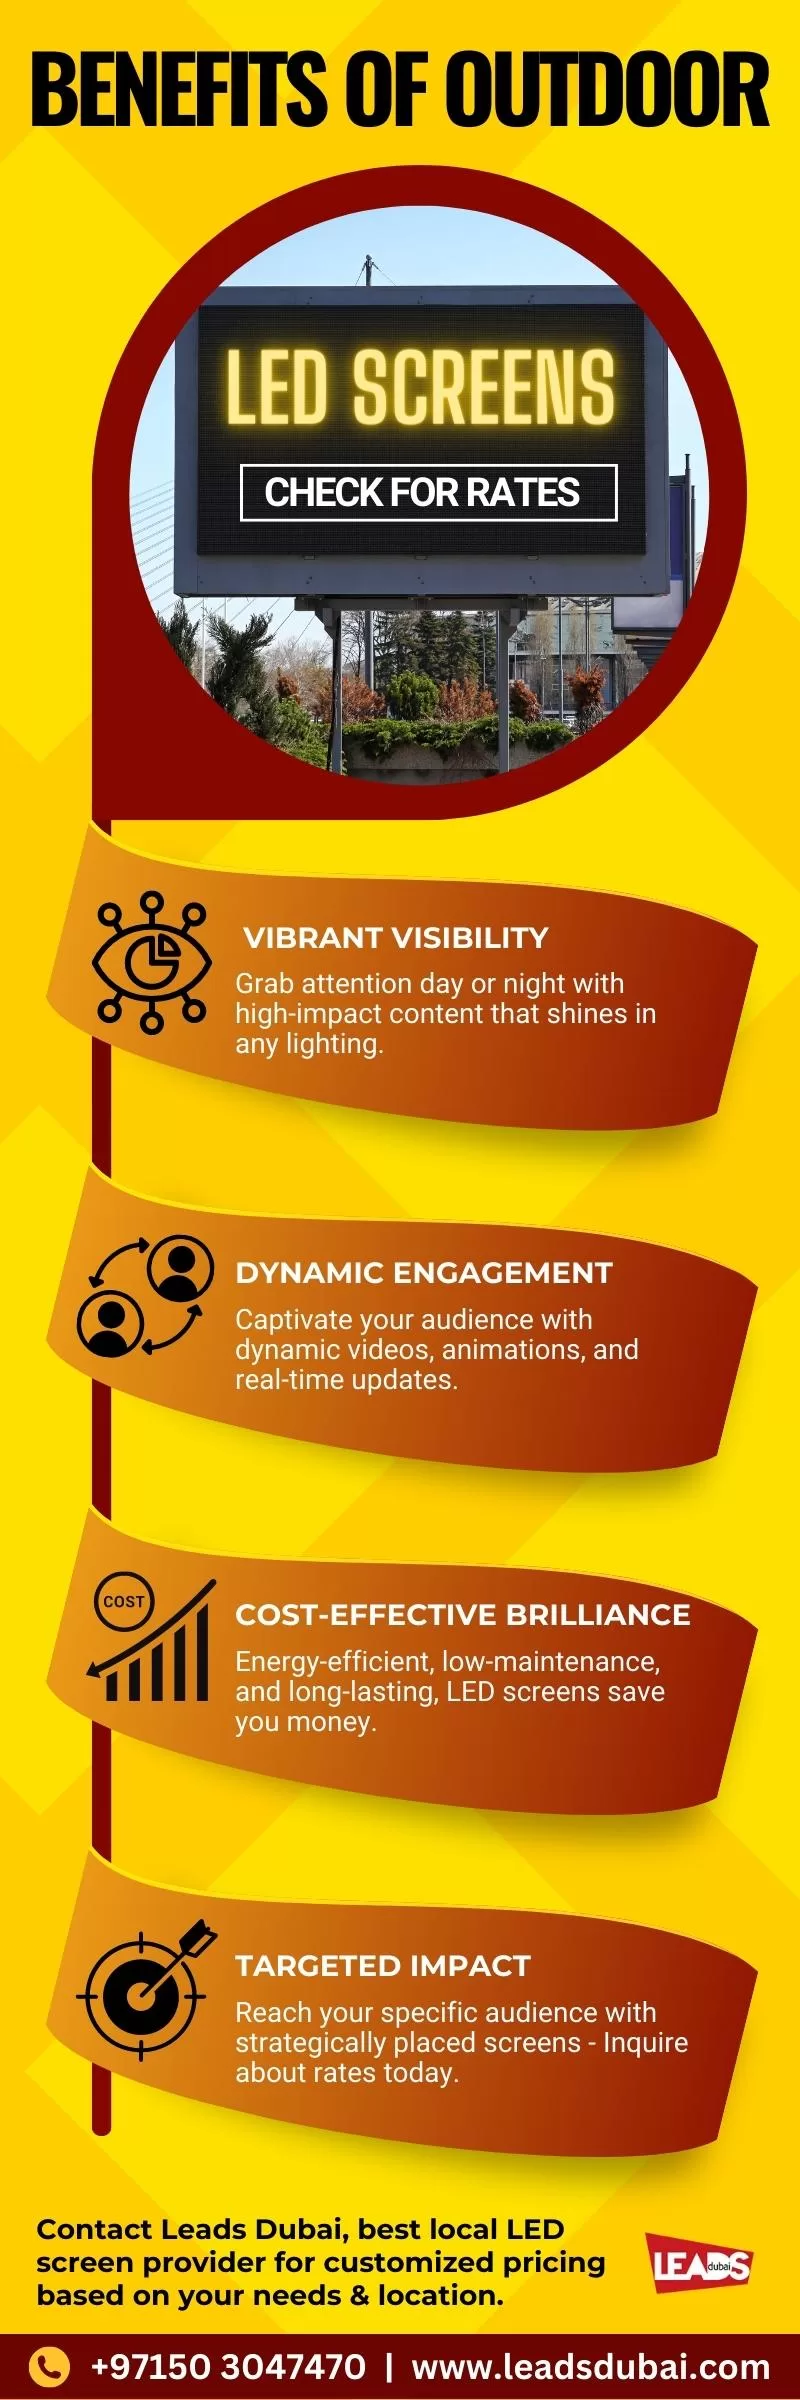 Benefits of Outdoor LED Screens - infographics